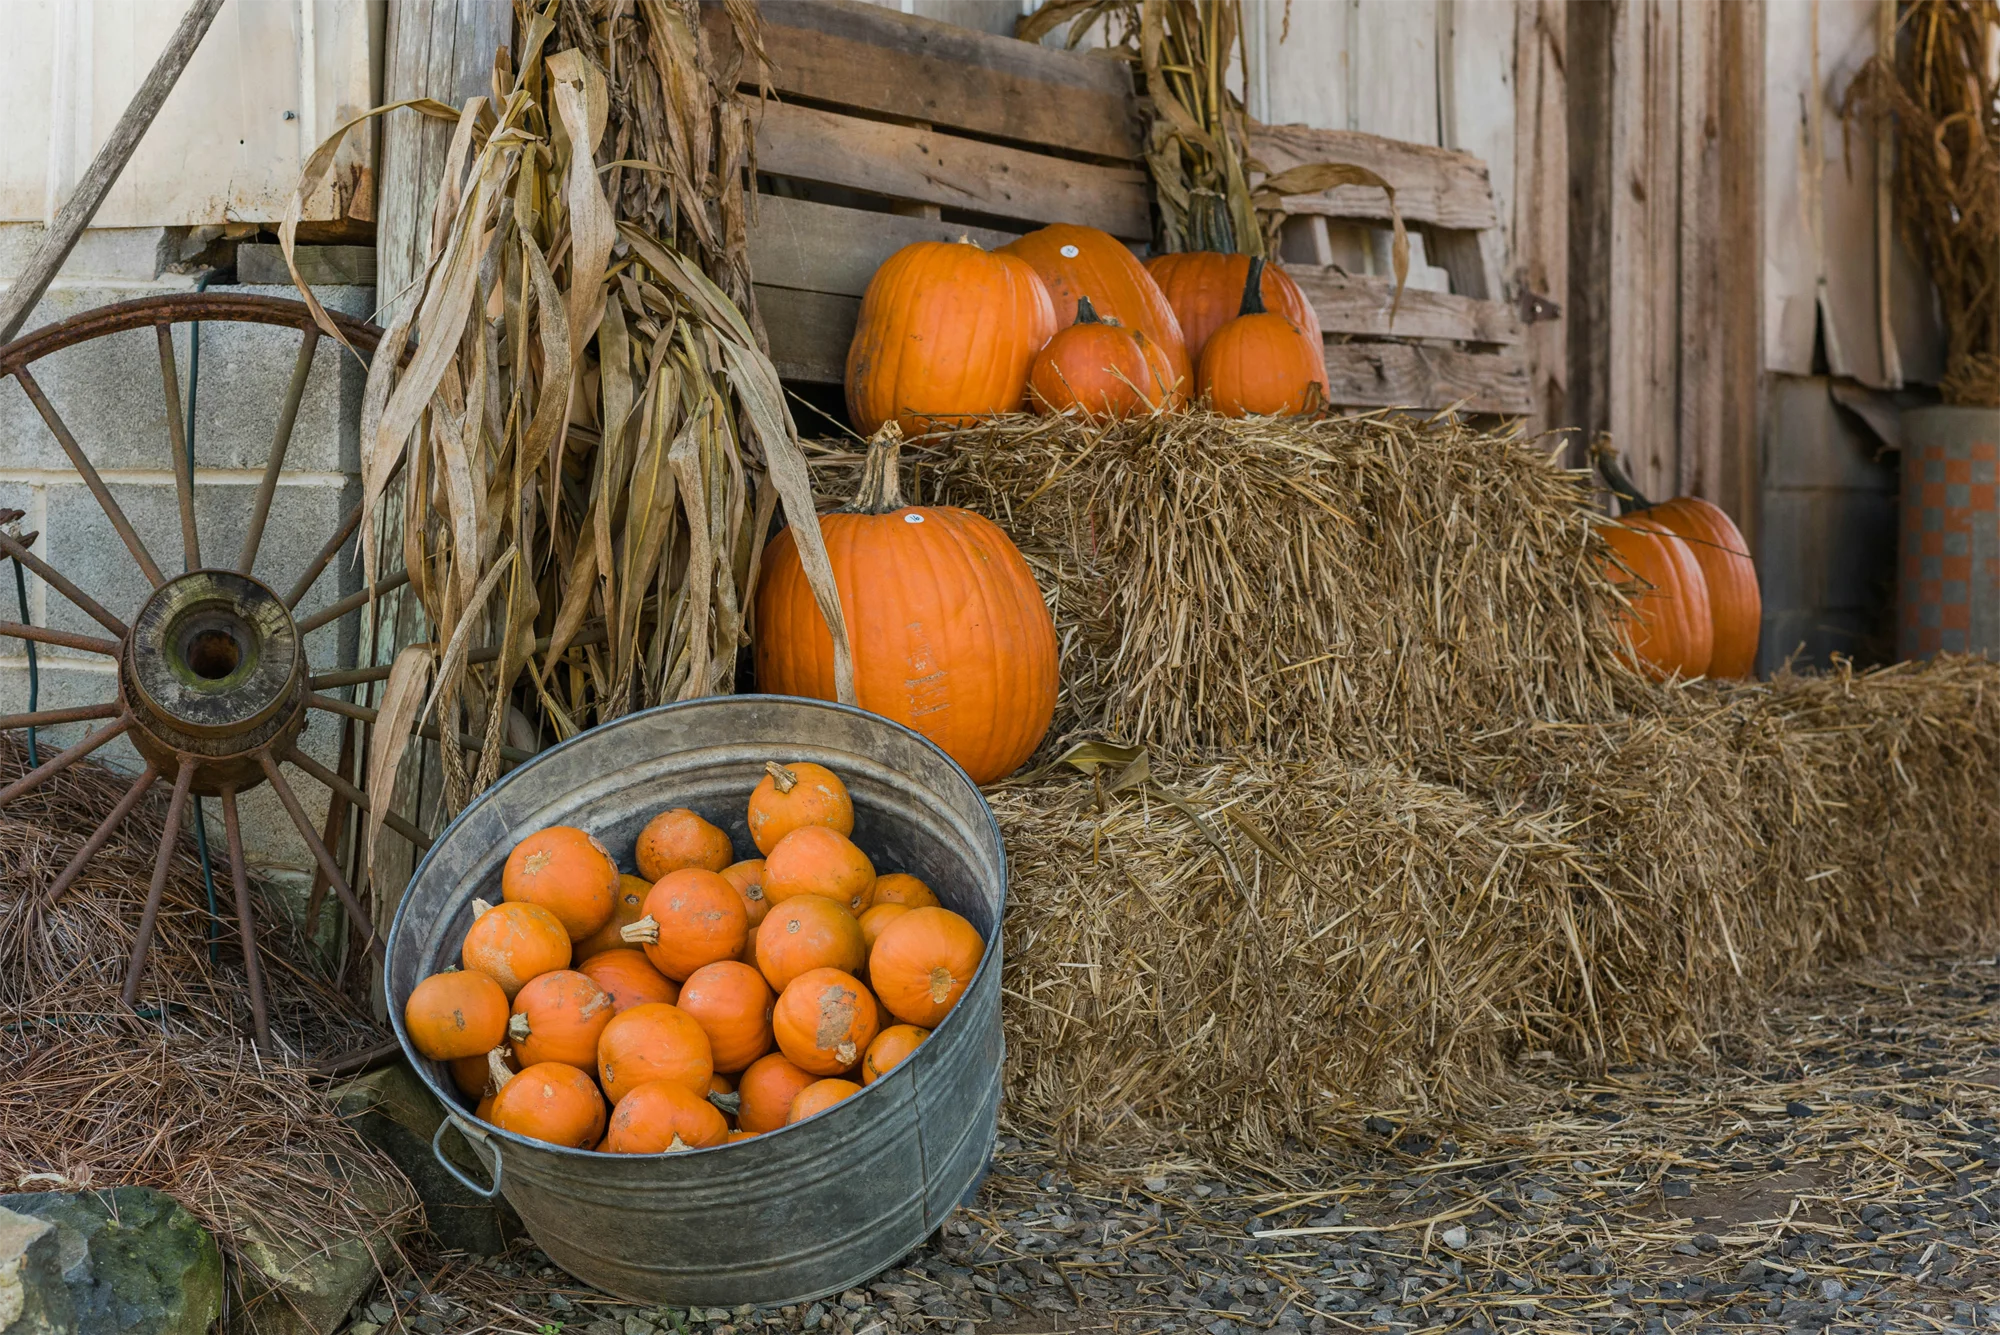 Pumpkins piled on hay in a barn